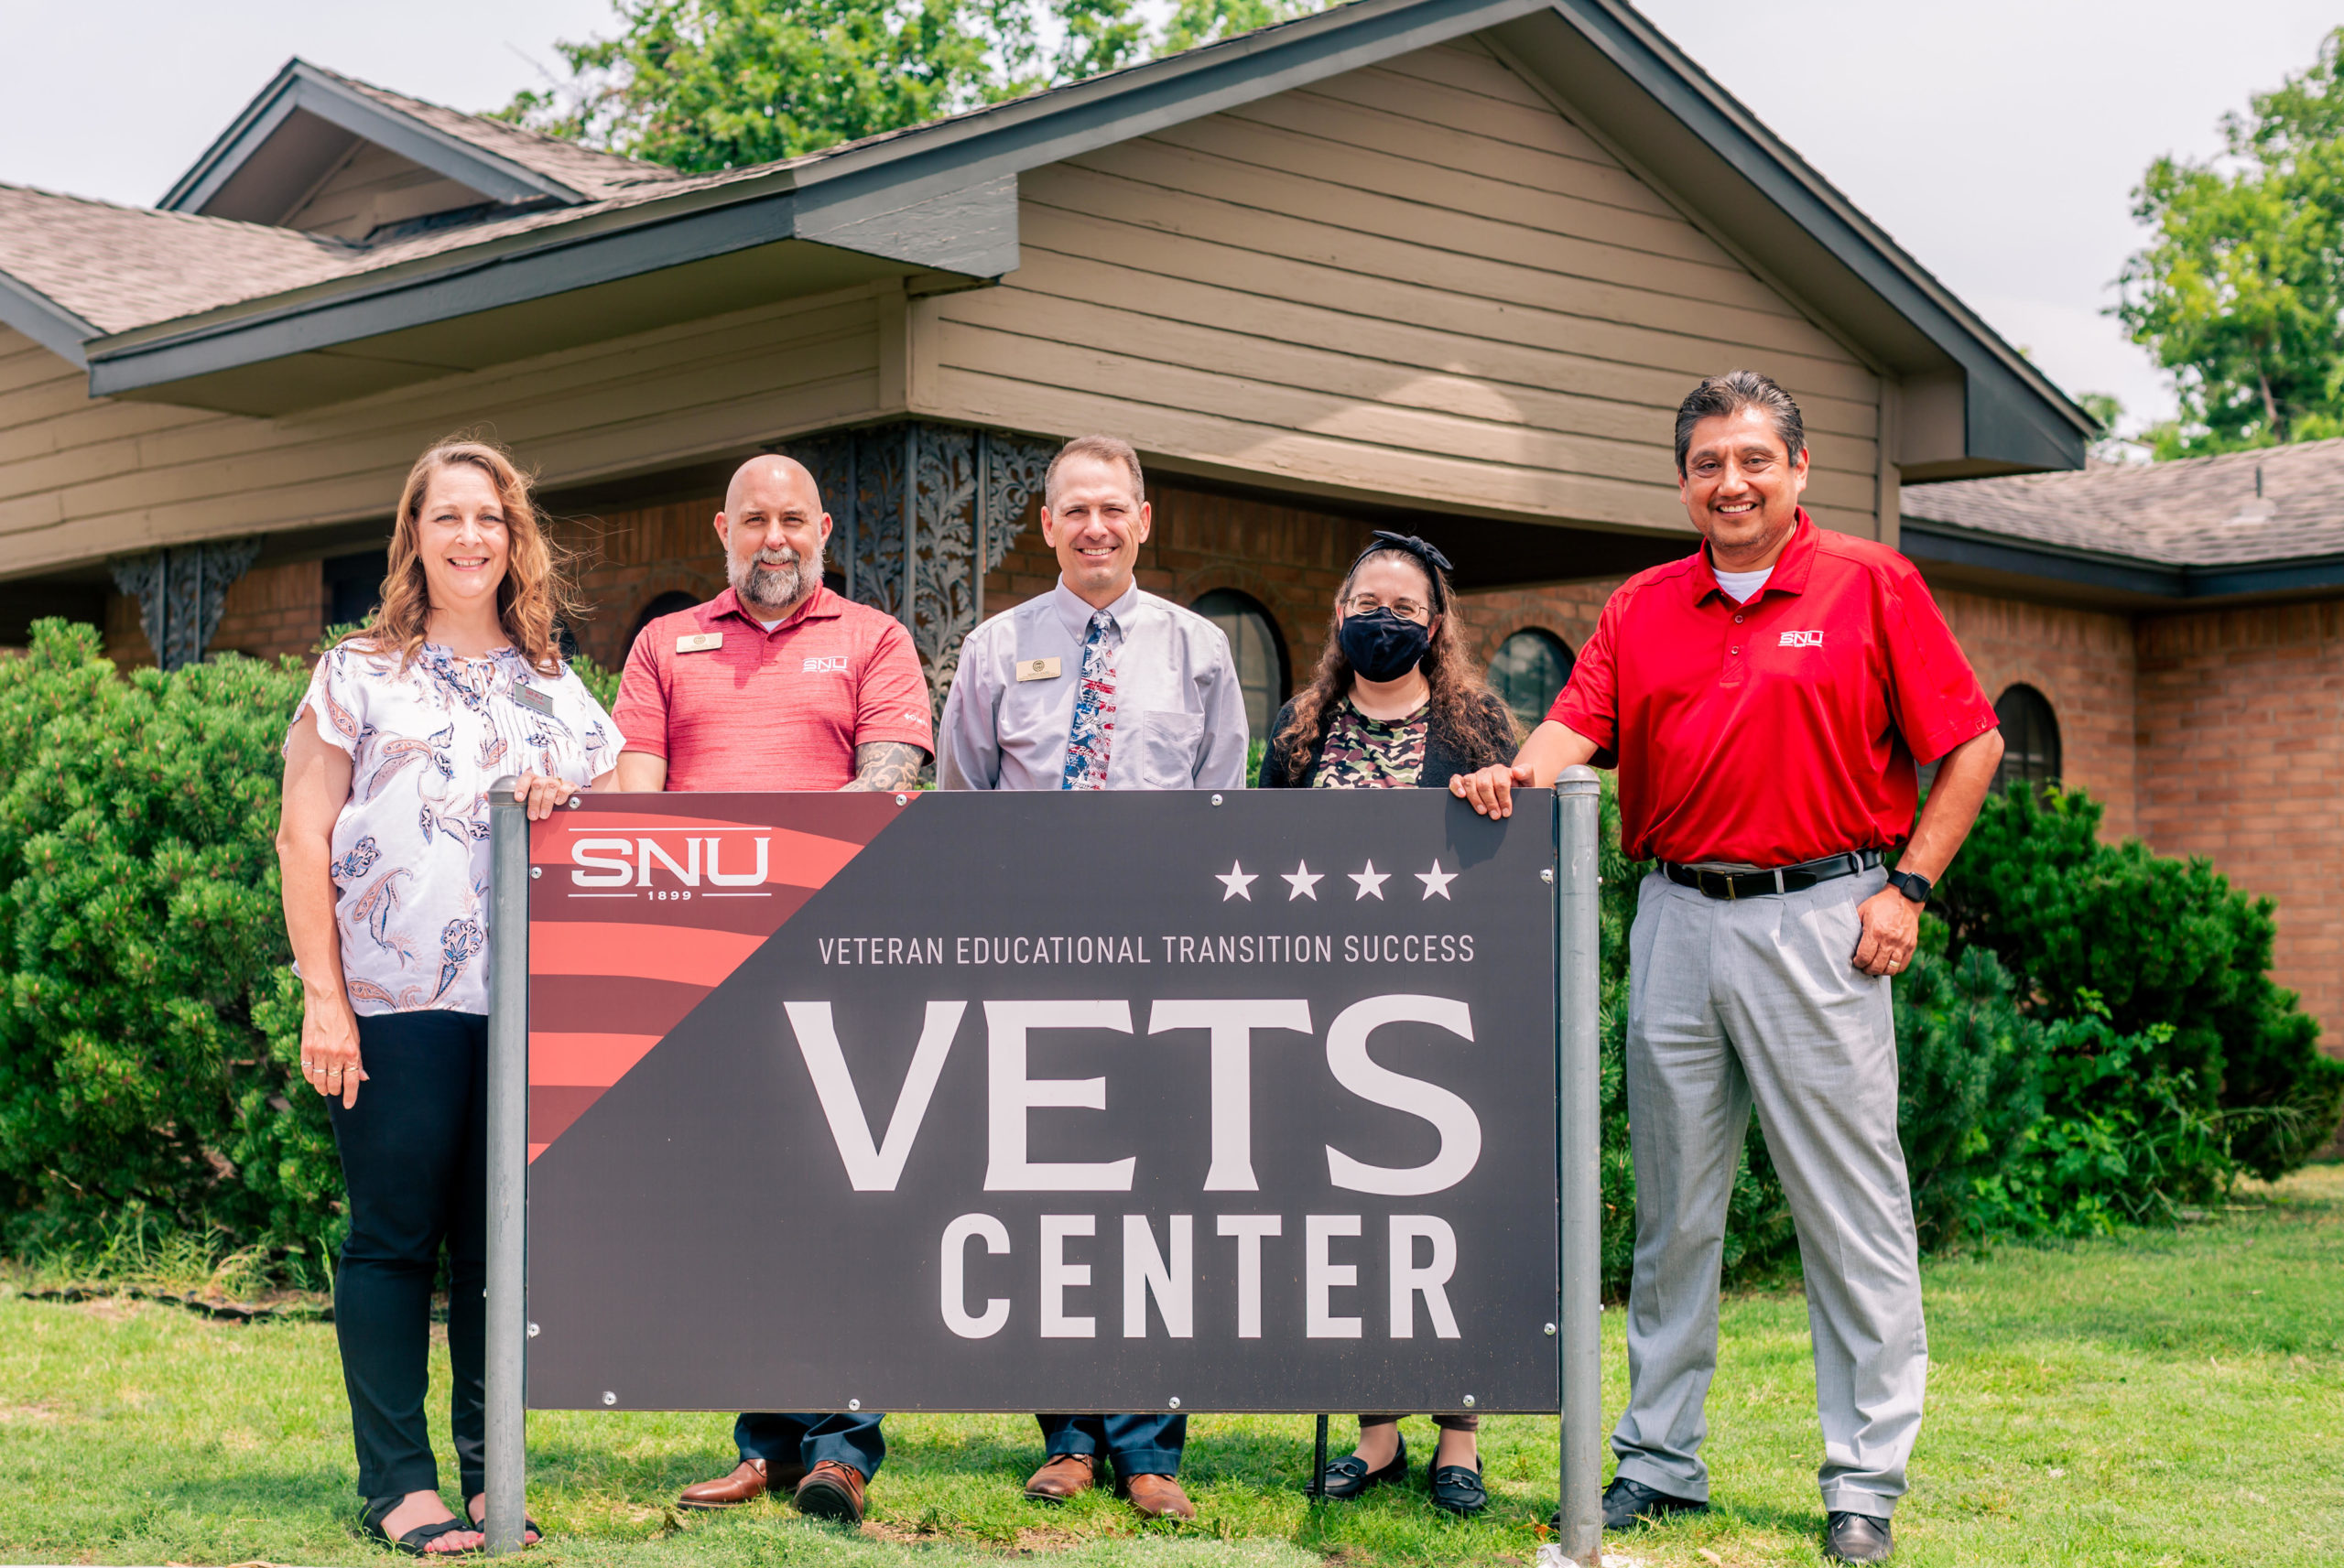 SNU VETS Center Makes Two New Hires